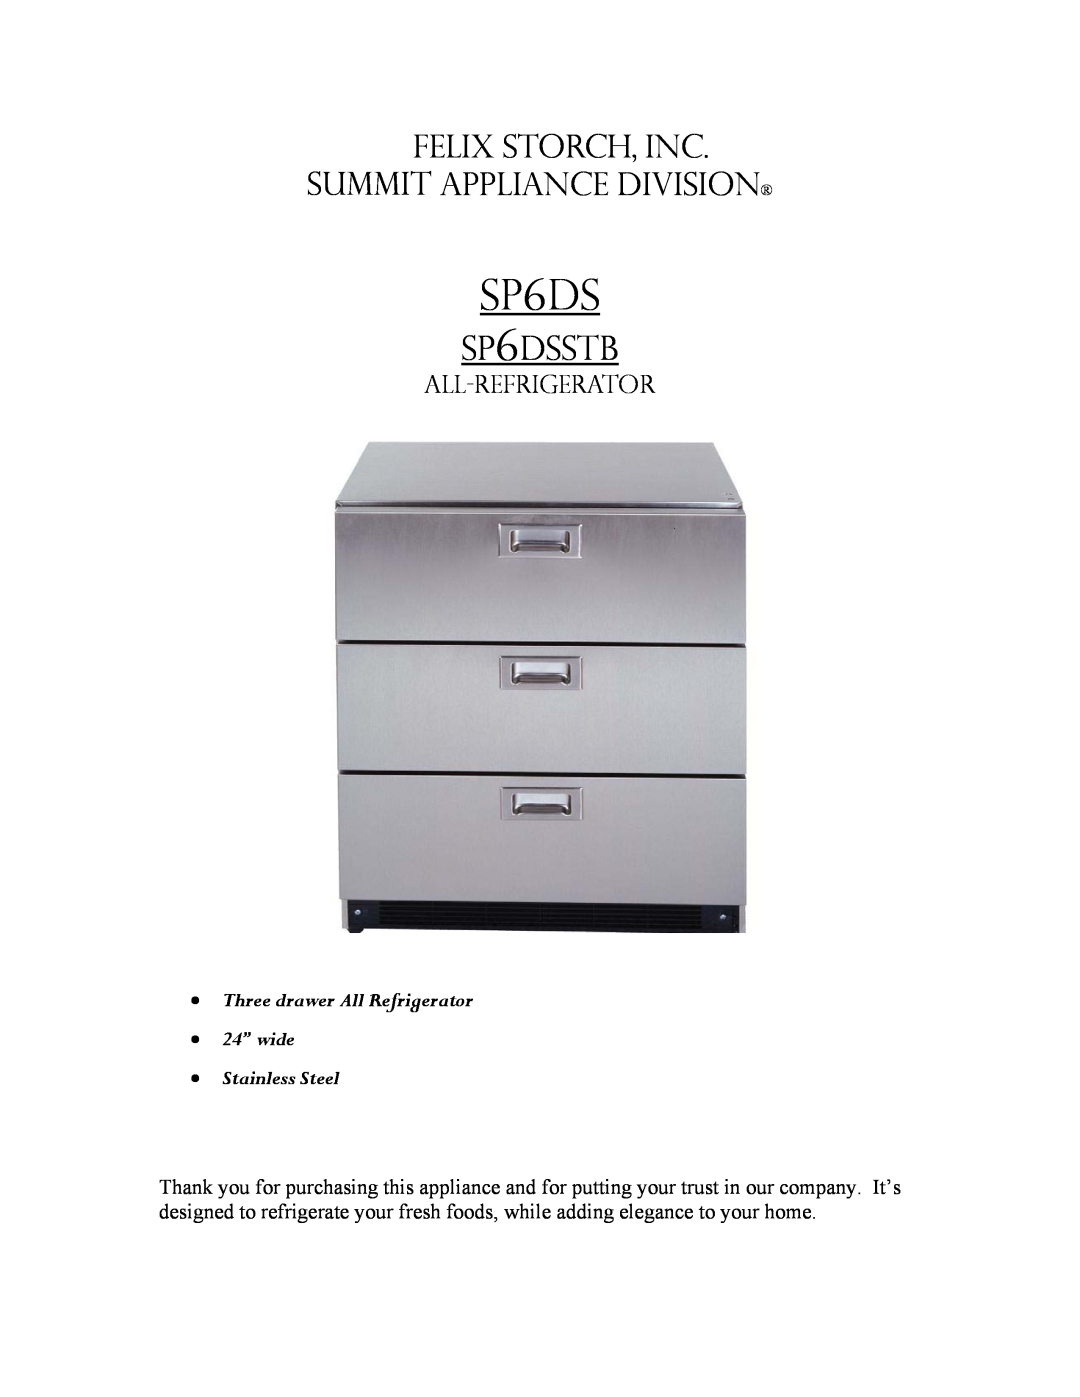 Summit manual SP6DSSTB, Felix Storch, Inc Summit Appliance Division, All-Refrigerator, Stainless Steel 